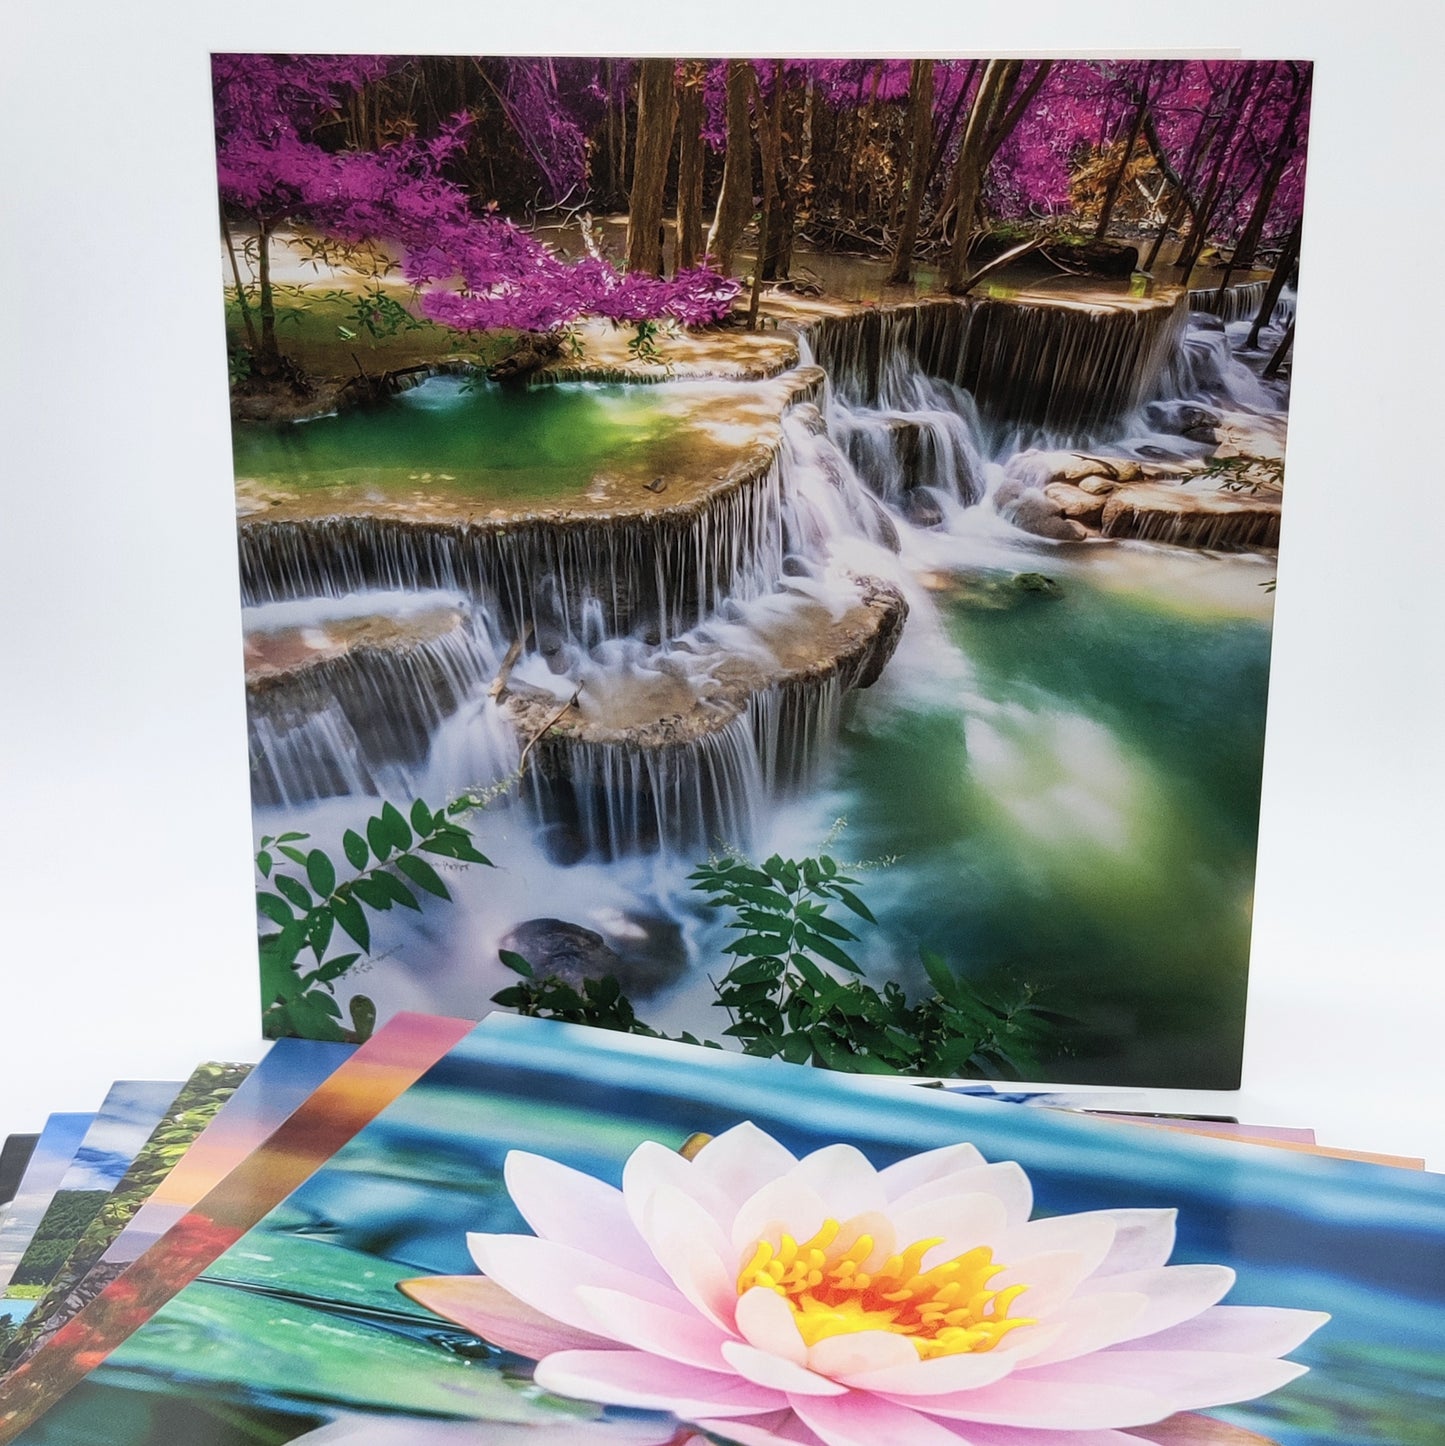 10 Photographic Greetings Cards